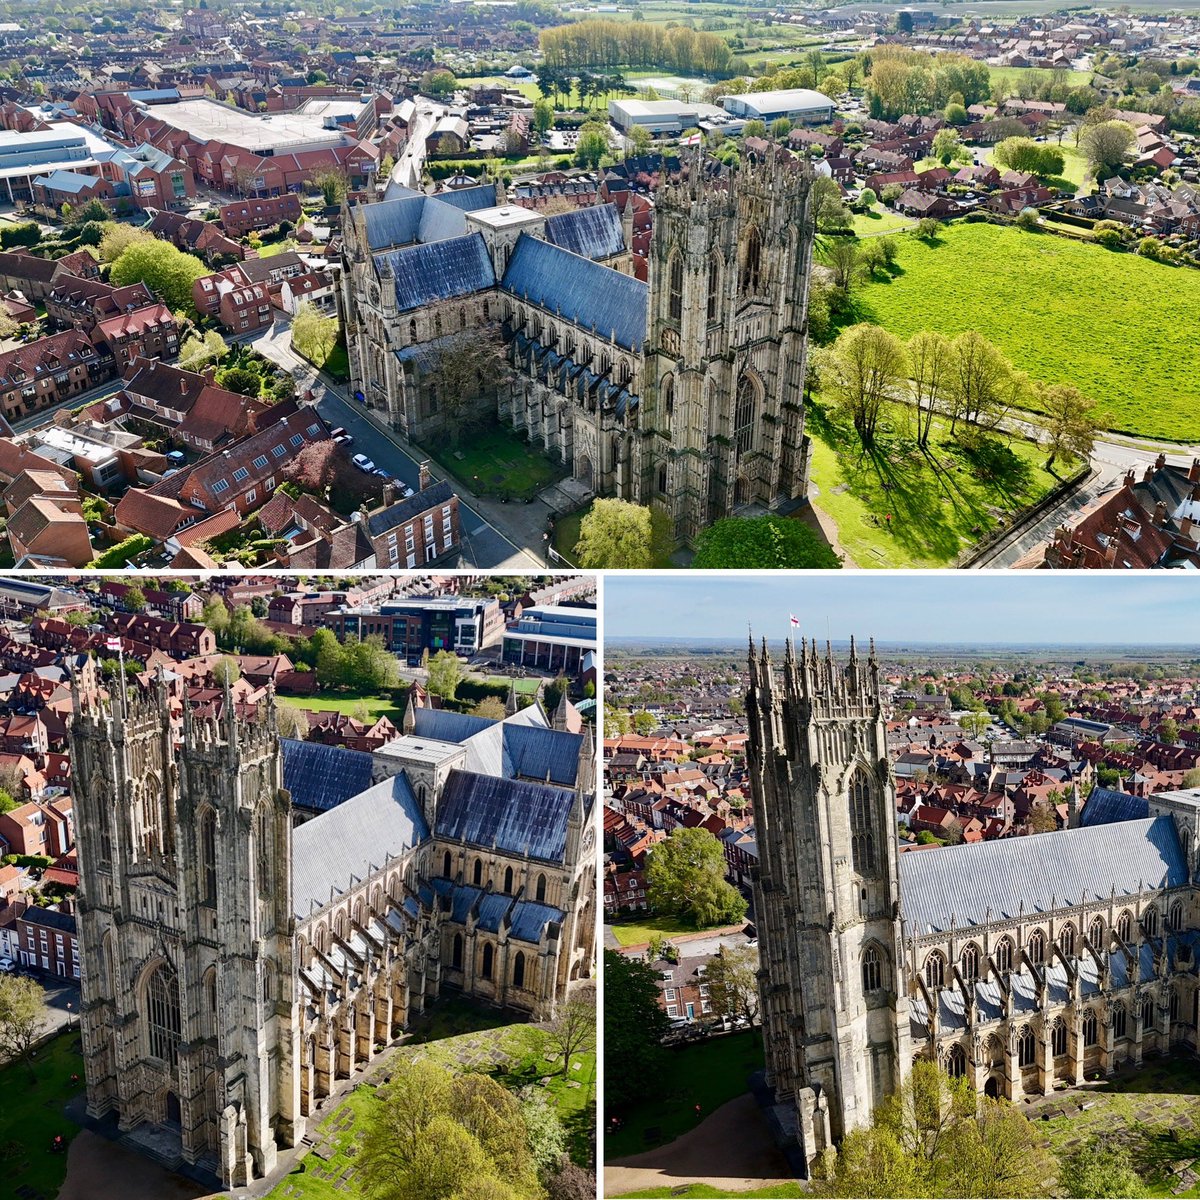 Beverley Minster, in Beverley, East Riding of Yorkshire, looking stunning today whilst filming 🎥🎬 

#thedroneman  #kurniaaerialphotography #DroneProduction #AerialProduction #DroneVideography #AerialFilming #DroneFilming  #DroneServices #DroneAdvertising #DroneMarketing